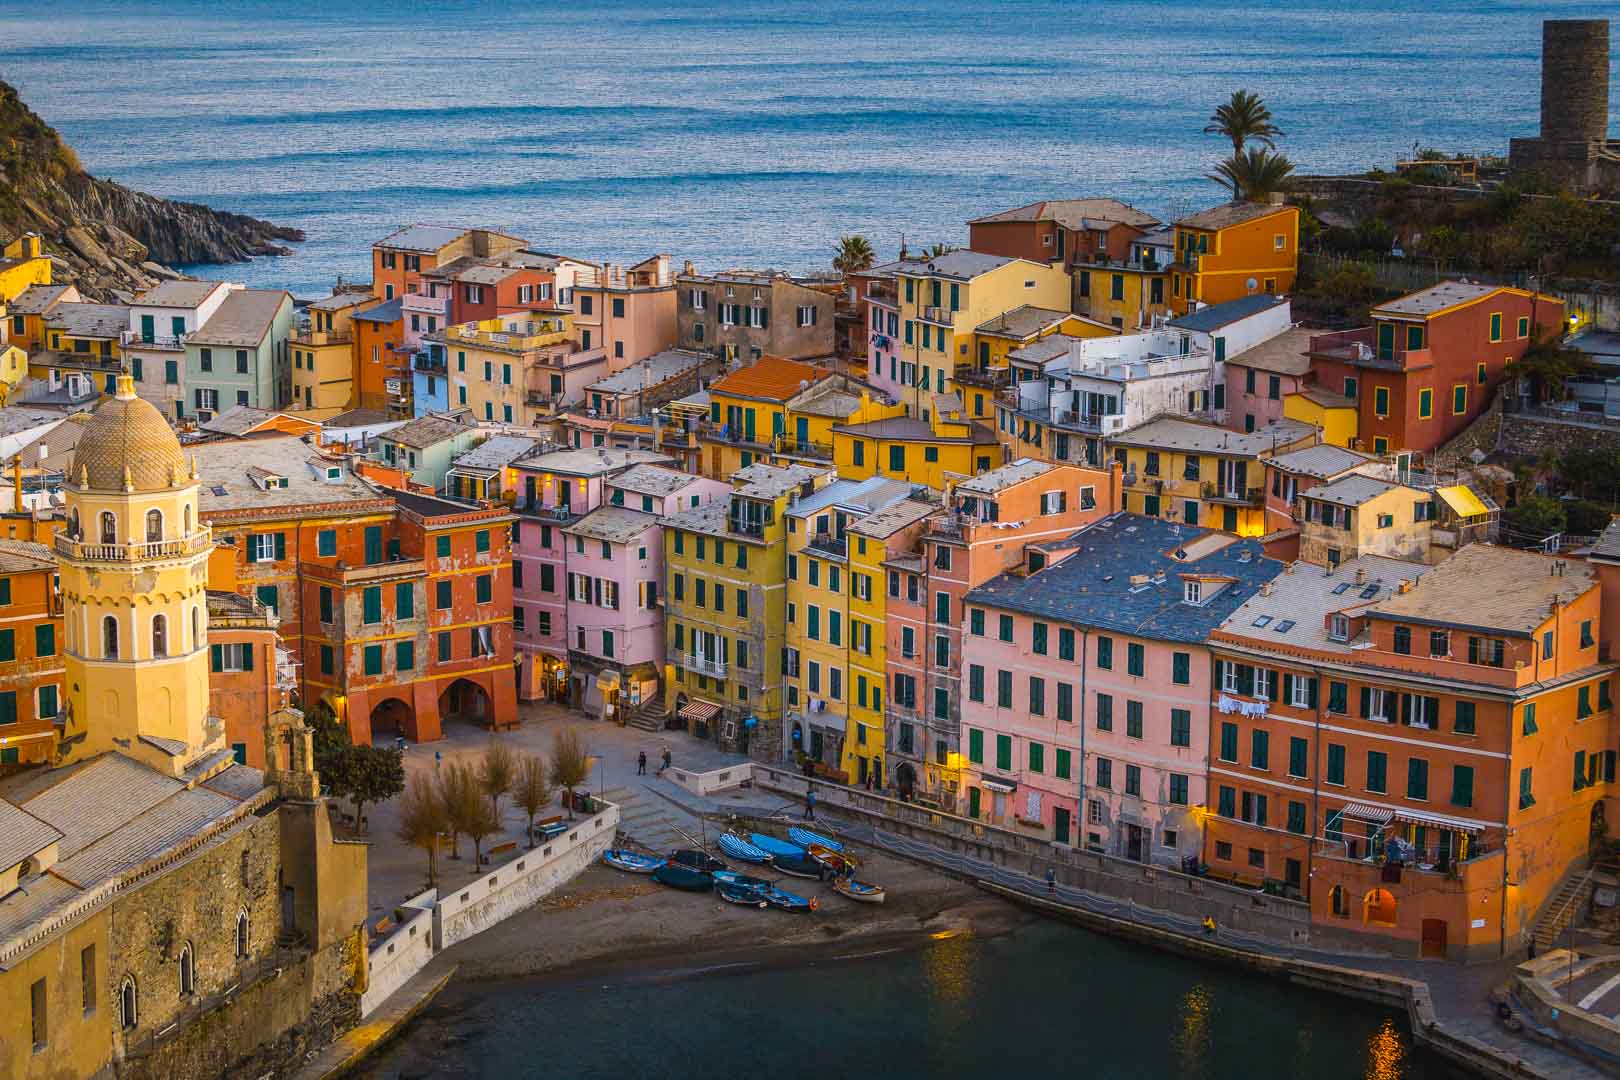 18 BEST Hotels in Vernazza Cinque Terre, Italy - kevmrc.com